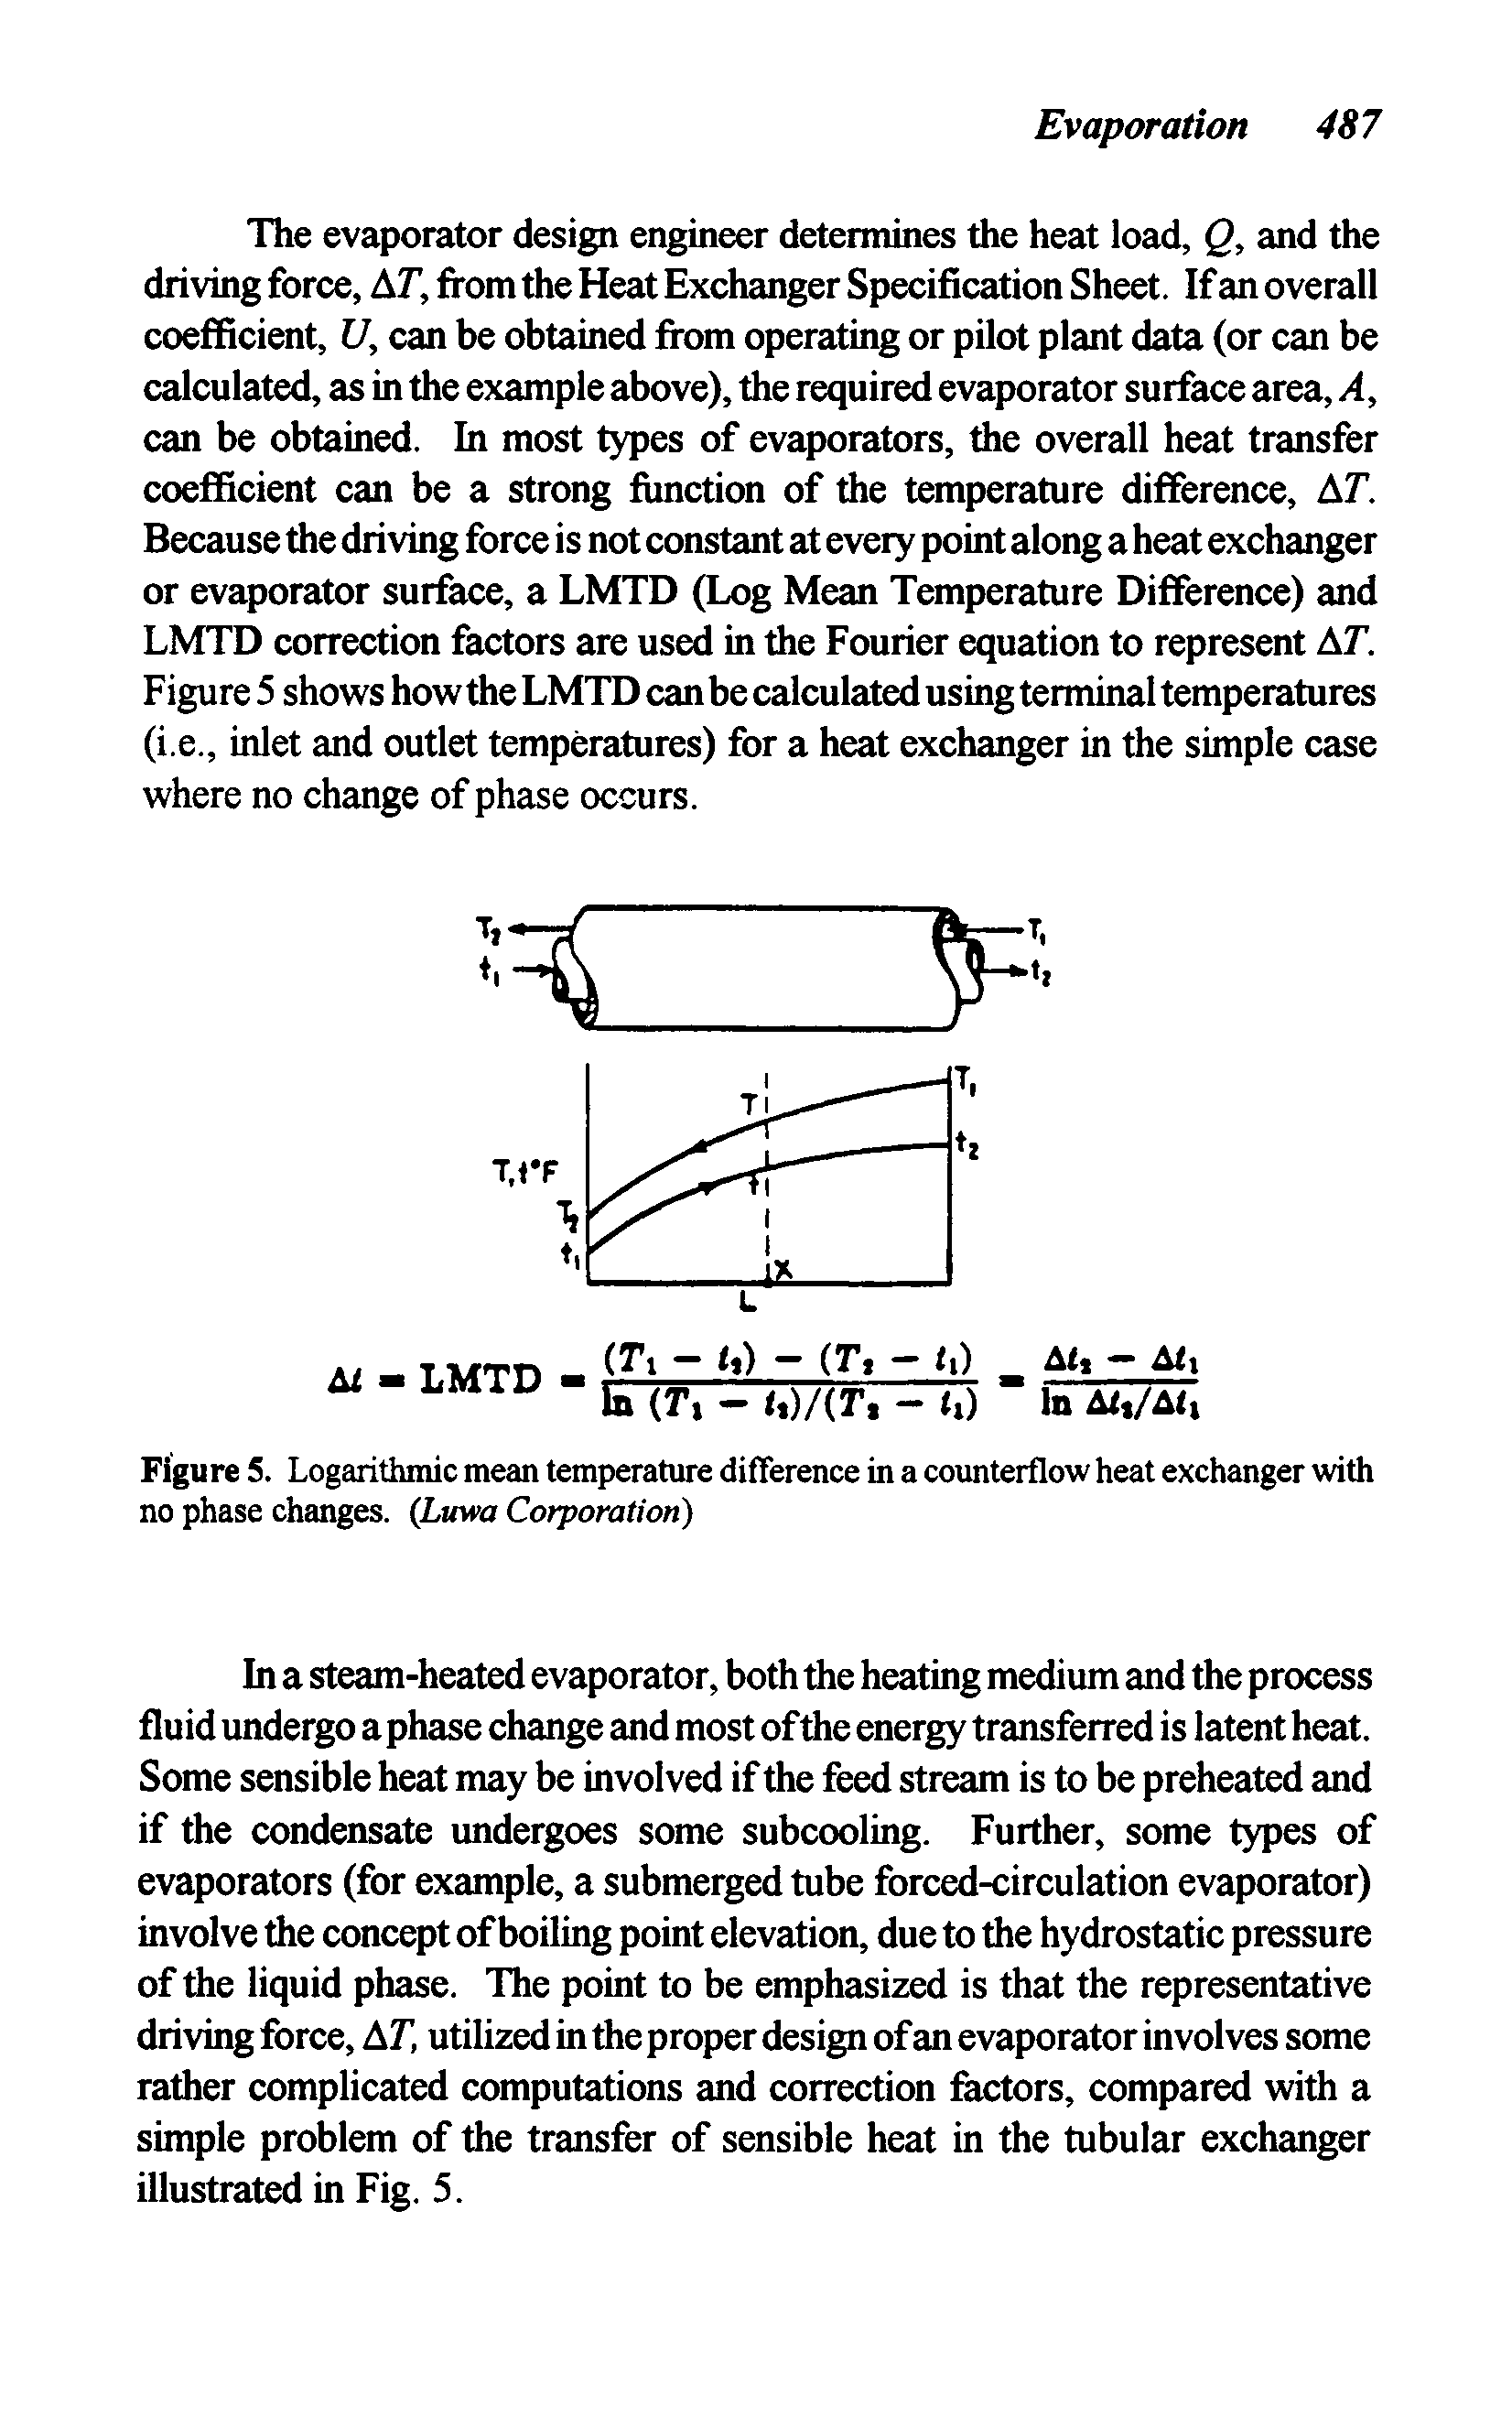 Figure 5. Logarithmic mean temperature difference in a counterflow heat exchanger with no phase changes. (Luwa Corporation)...